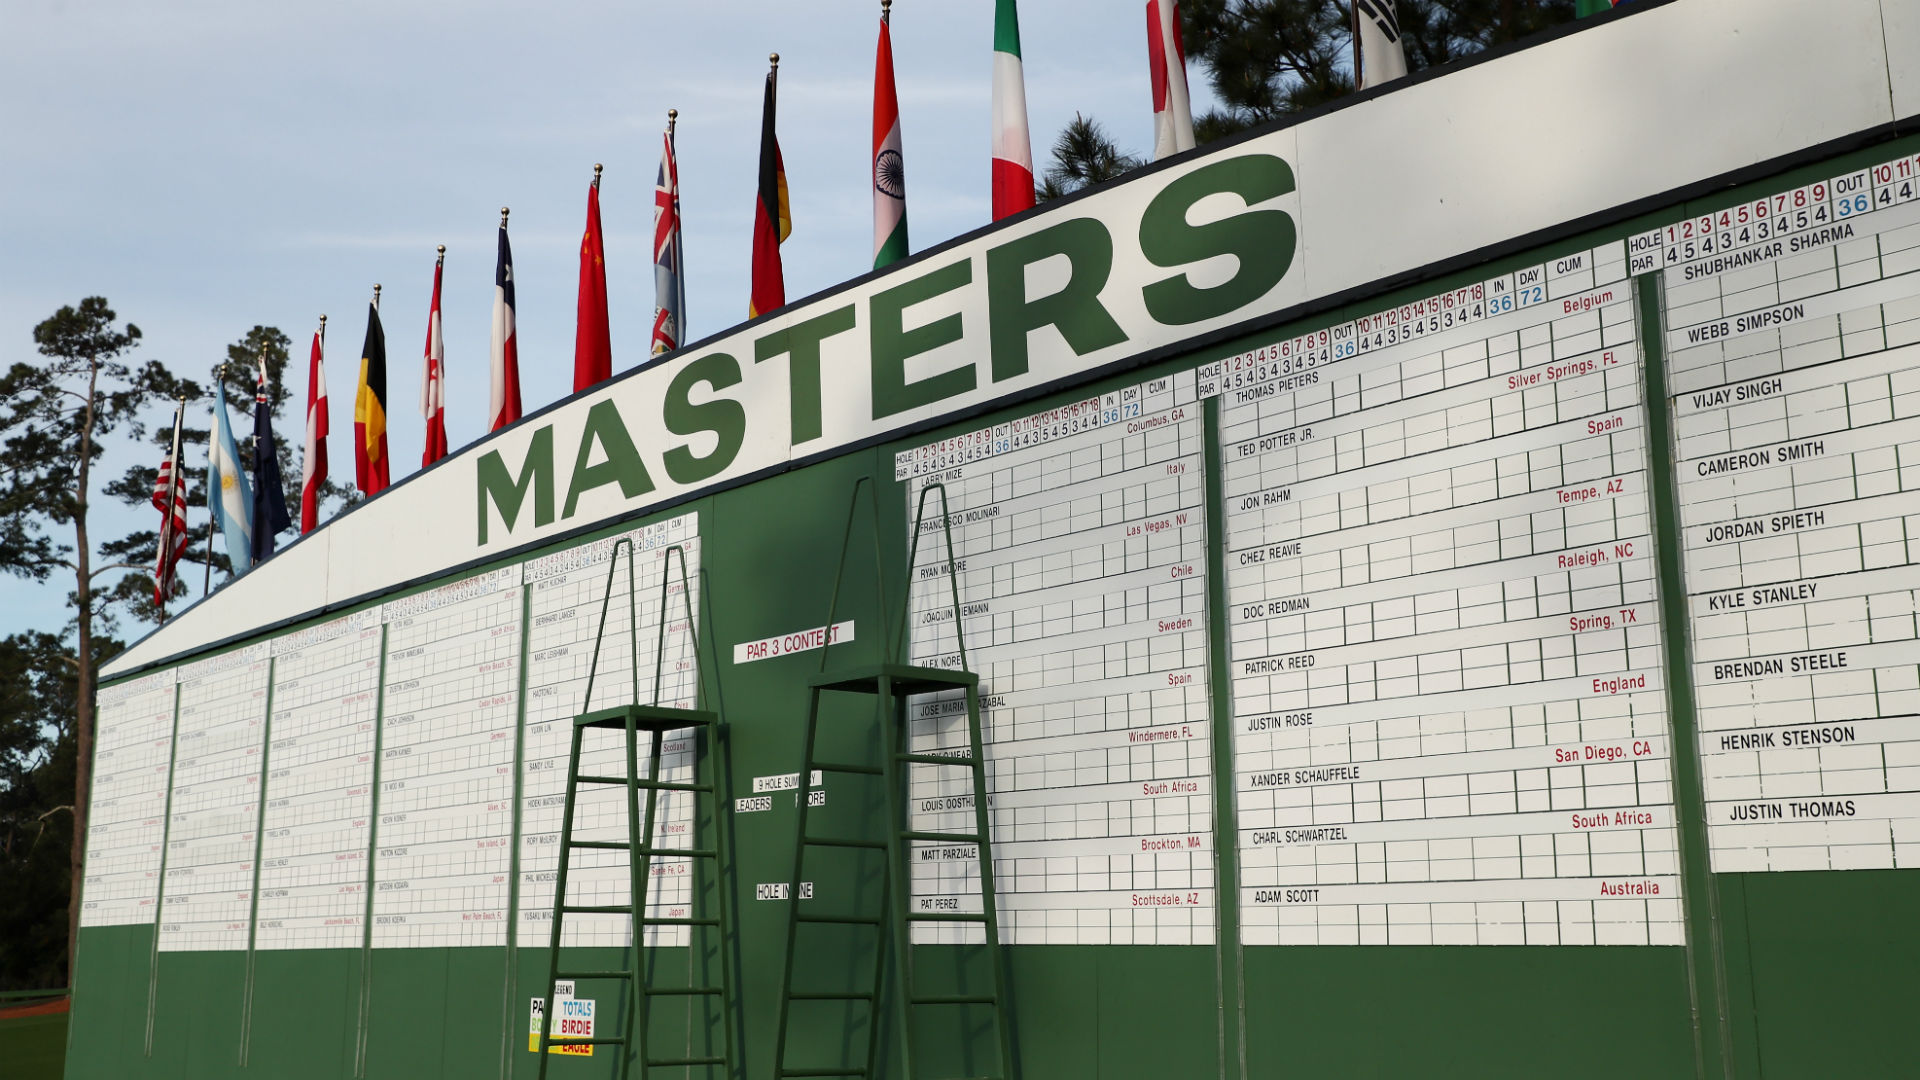 Ahead of the first major of the year, we take a look at the best Opta facts surrounding the 82nd edition of the Masters at Augusta.